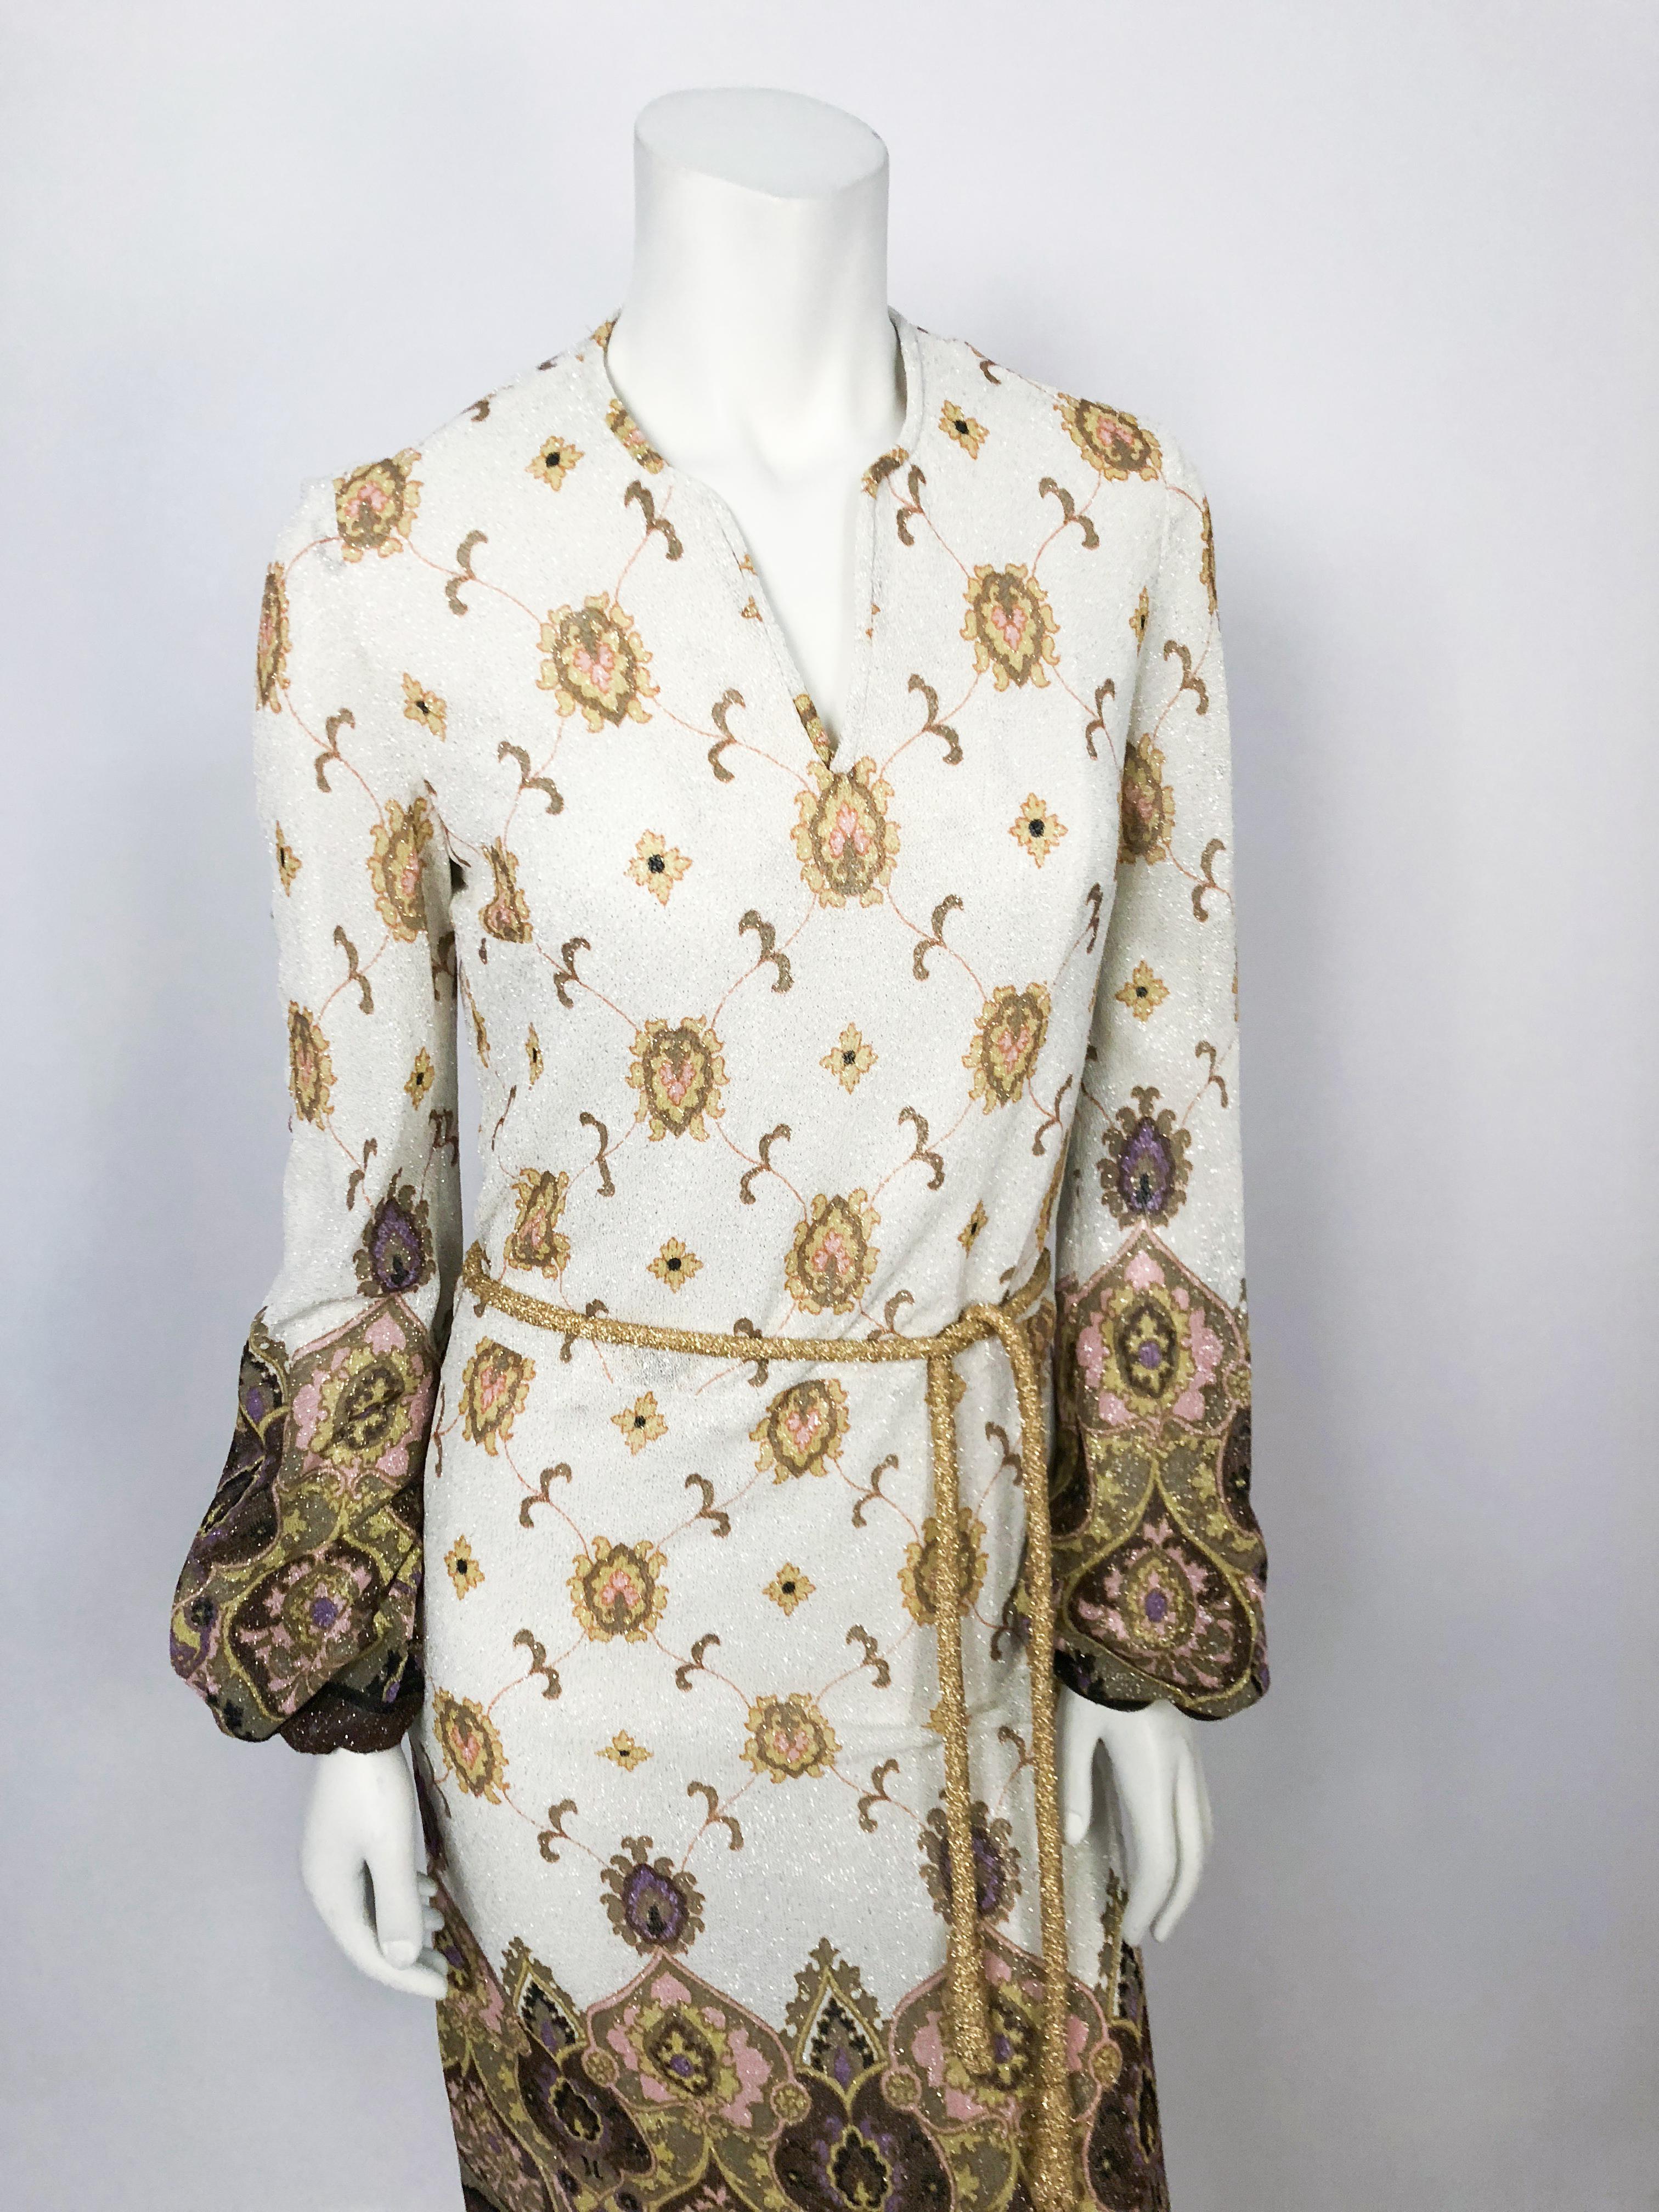 1970s Printed Cram and Pink Dress With Matching Belt. Boarder Printed dress with matching rolled gold cord sash, gathered rists, and full lining. The fabric has a silver lurex shine in it. 